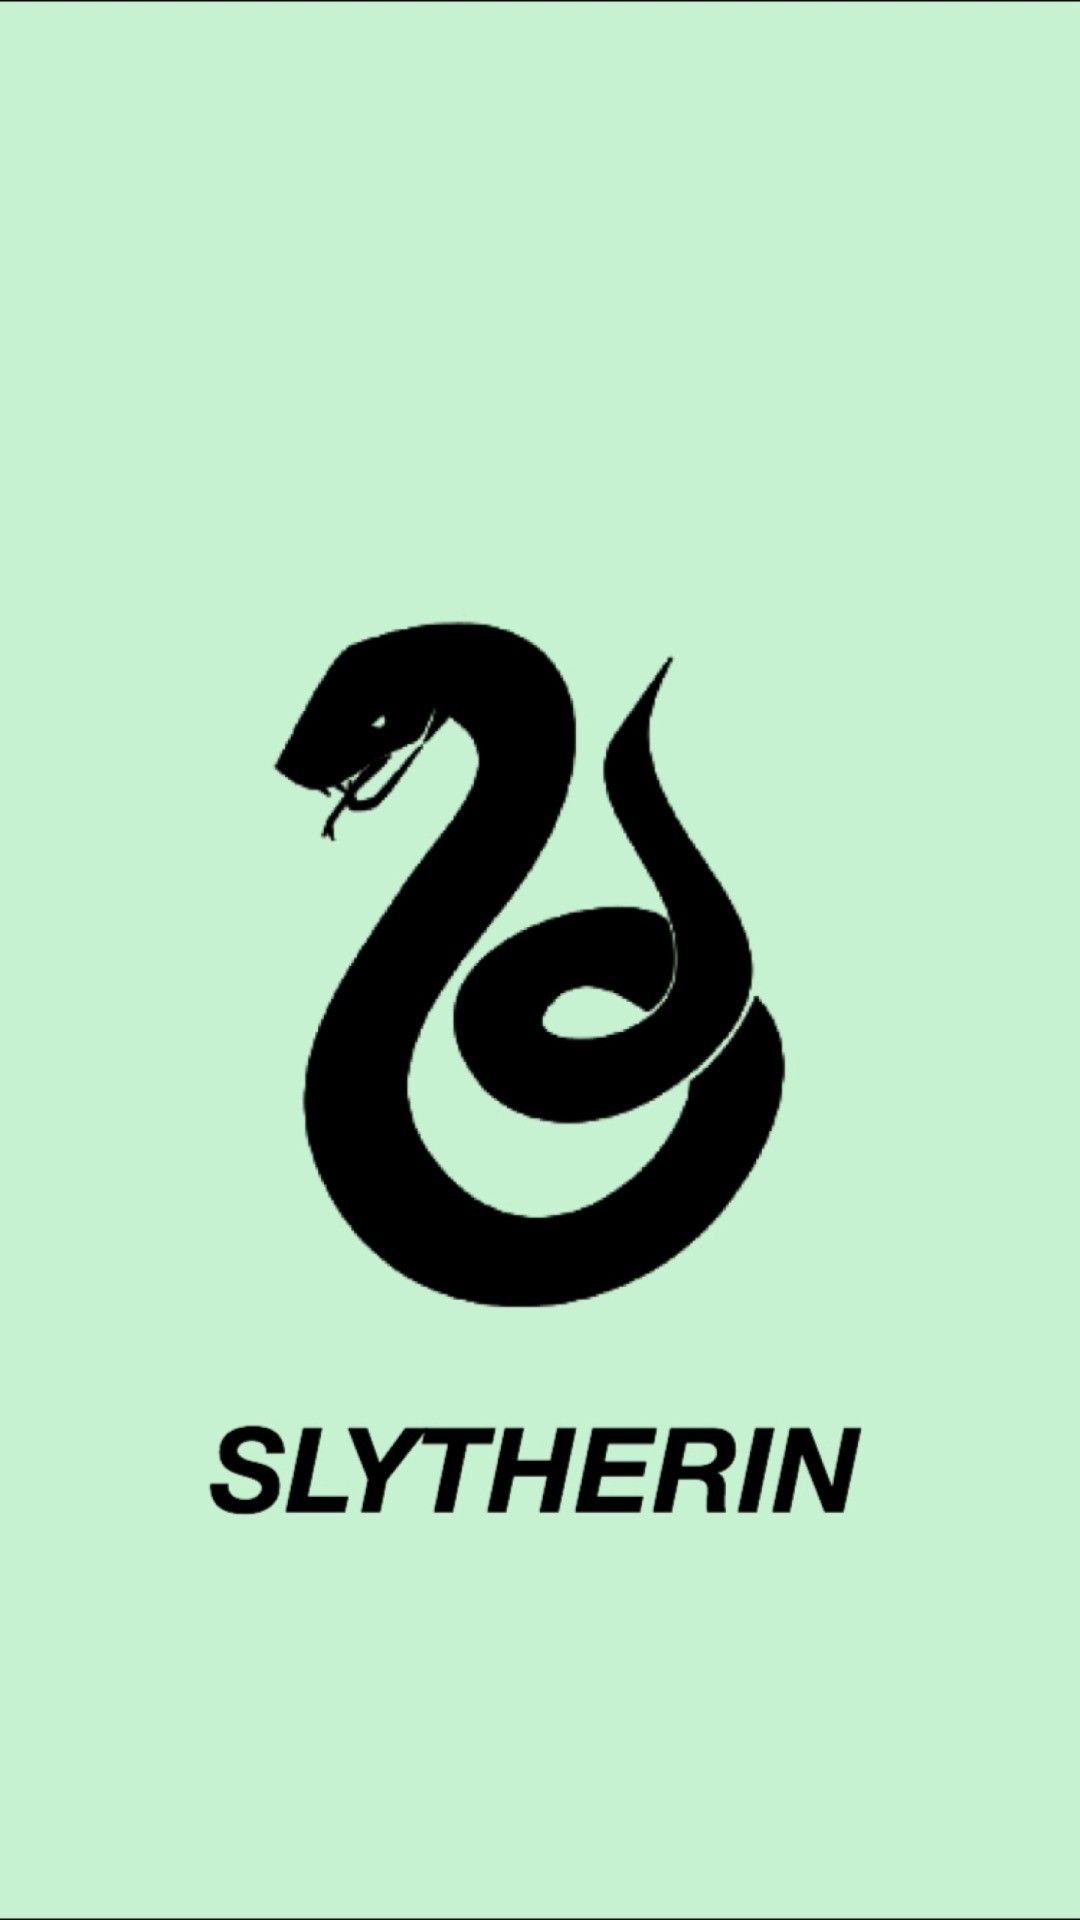 1080x1920 Slytherin Wallpaper Iphone